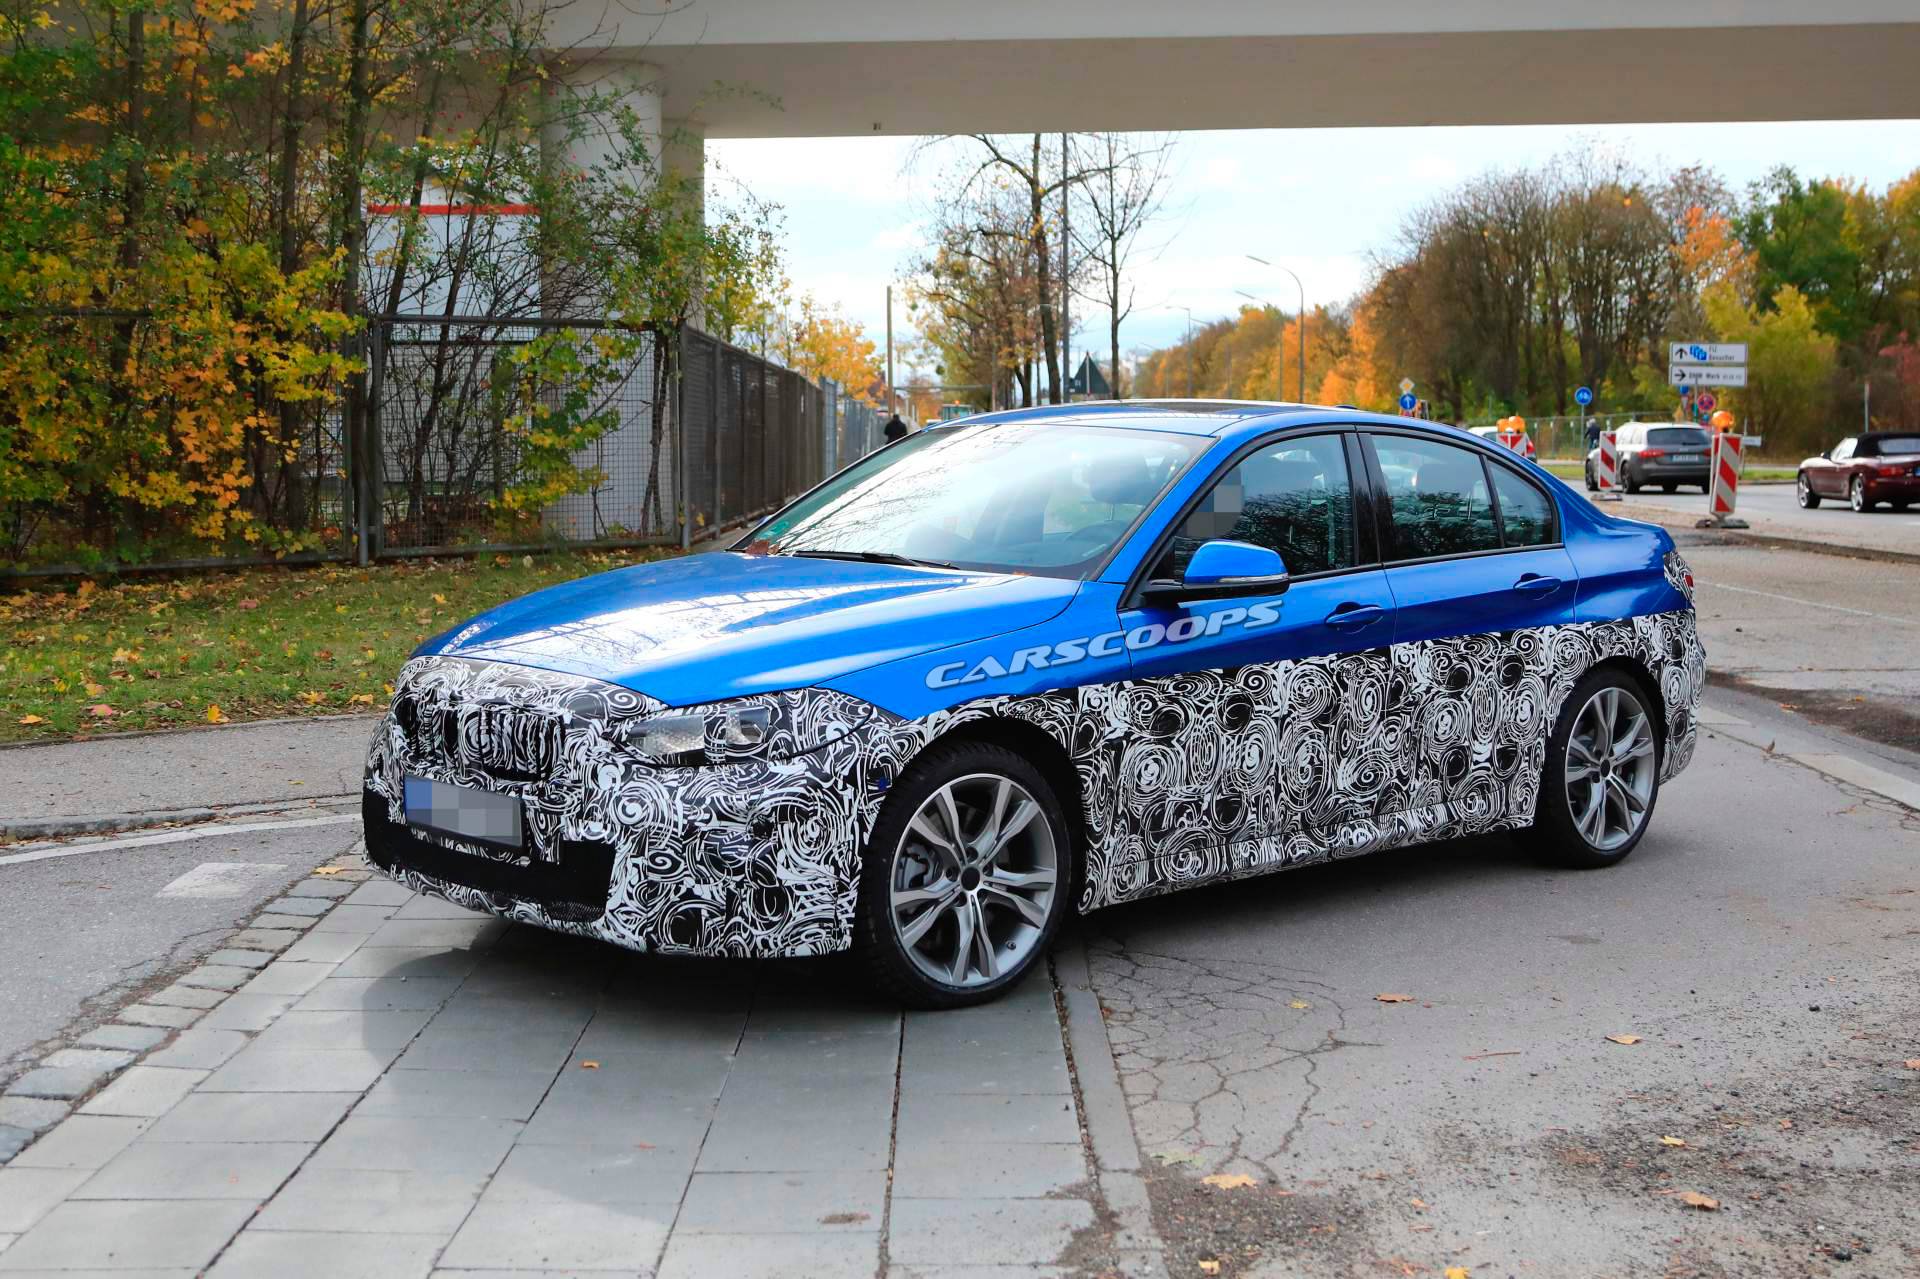 Facelifted 2020 BMW 1 Series Sedan Spotted In Germany, Is